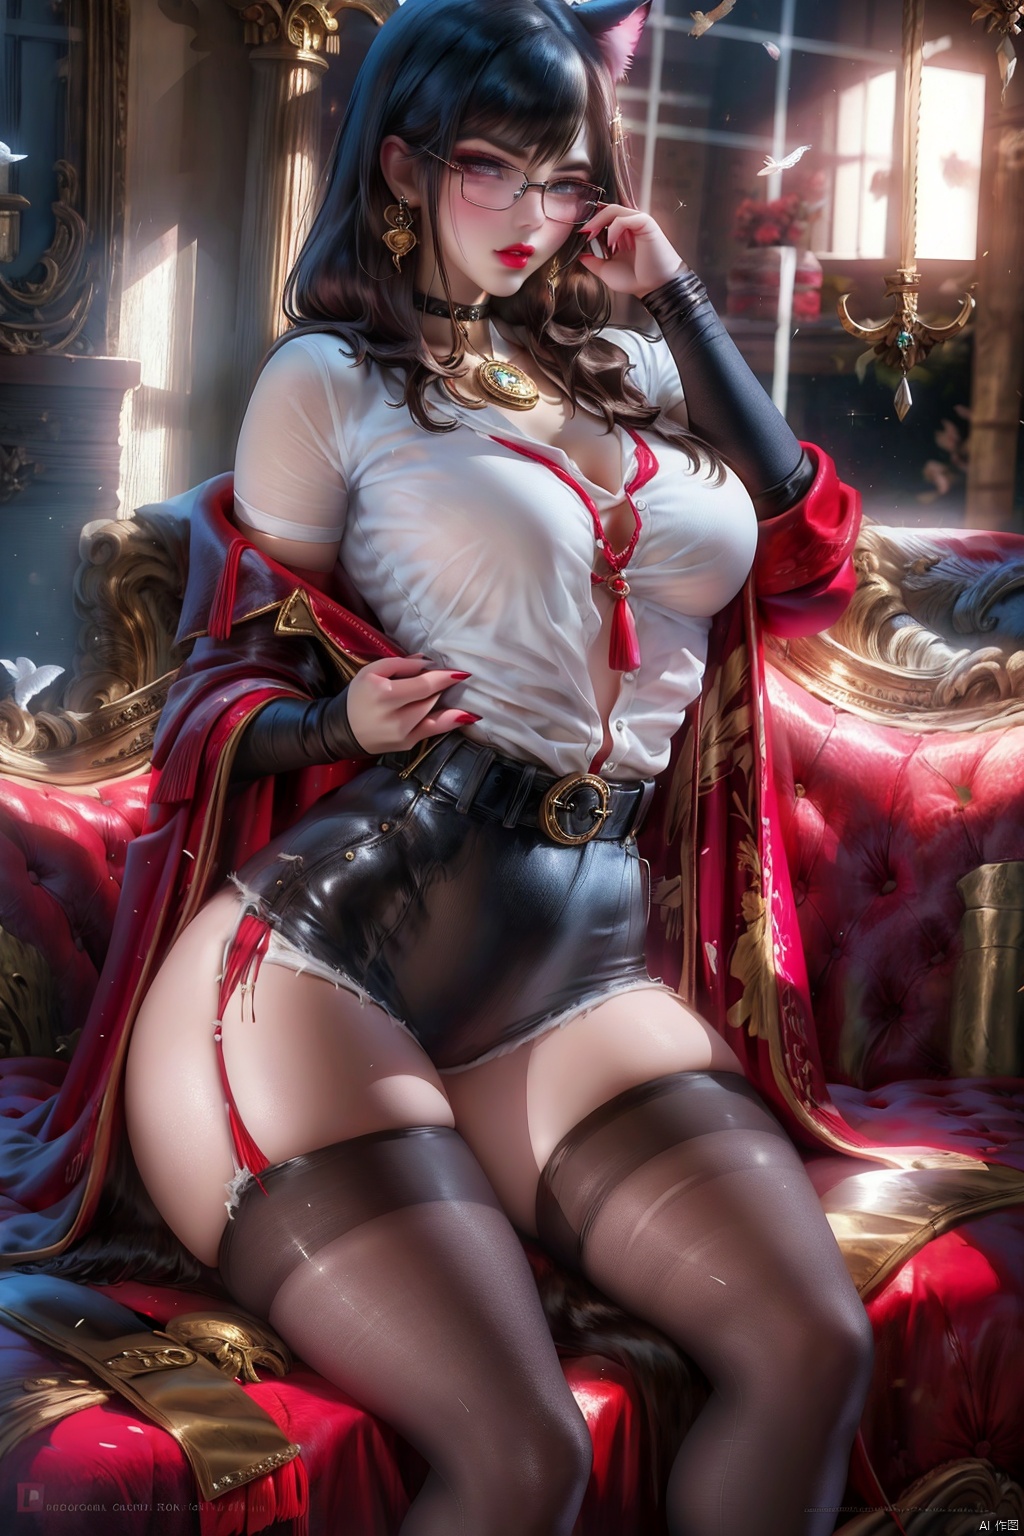 1girl,queen,*****,fair_skin,plump,red hair,swept bangs,high ponytail,lipstick,cat ears,yellow eyes,slit_pupils,huge breasts,suit,shiny_clothes,skirt_suit,black_bodystocking,tight,fine_fabric_emphasis,thigh_boots,glasses,single_sleeve,latex_gloves,cross_hair_ornament,crystal,necklace,stud_earrings,collar,belt,bracelet,stud earrings,bunching_hair,feeding,highres,absurdres,incredibly absurdres,huge filesize,wallpaper,Volumetric Lighting,Cinematic Lighting,metallic luster,moody lighting,Tyndall effect,black,red,moon,indoor,bedroom,couch,koakuma,cushion,carpet,pillow,bat,full_shot,looking_at_viewer,front view,eyeshadow,fundoshi,makeup,long_eyelashes,red_lips_,blush, poakl ggll girl,流光,only 1girl, ((poakl))